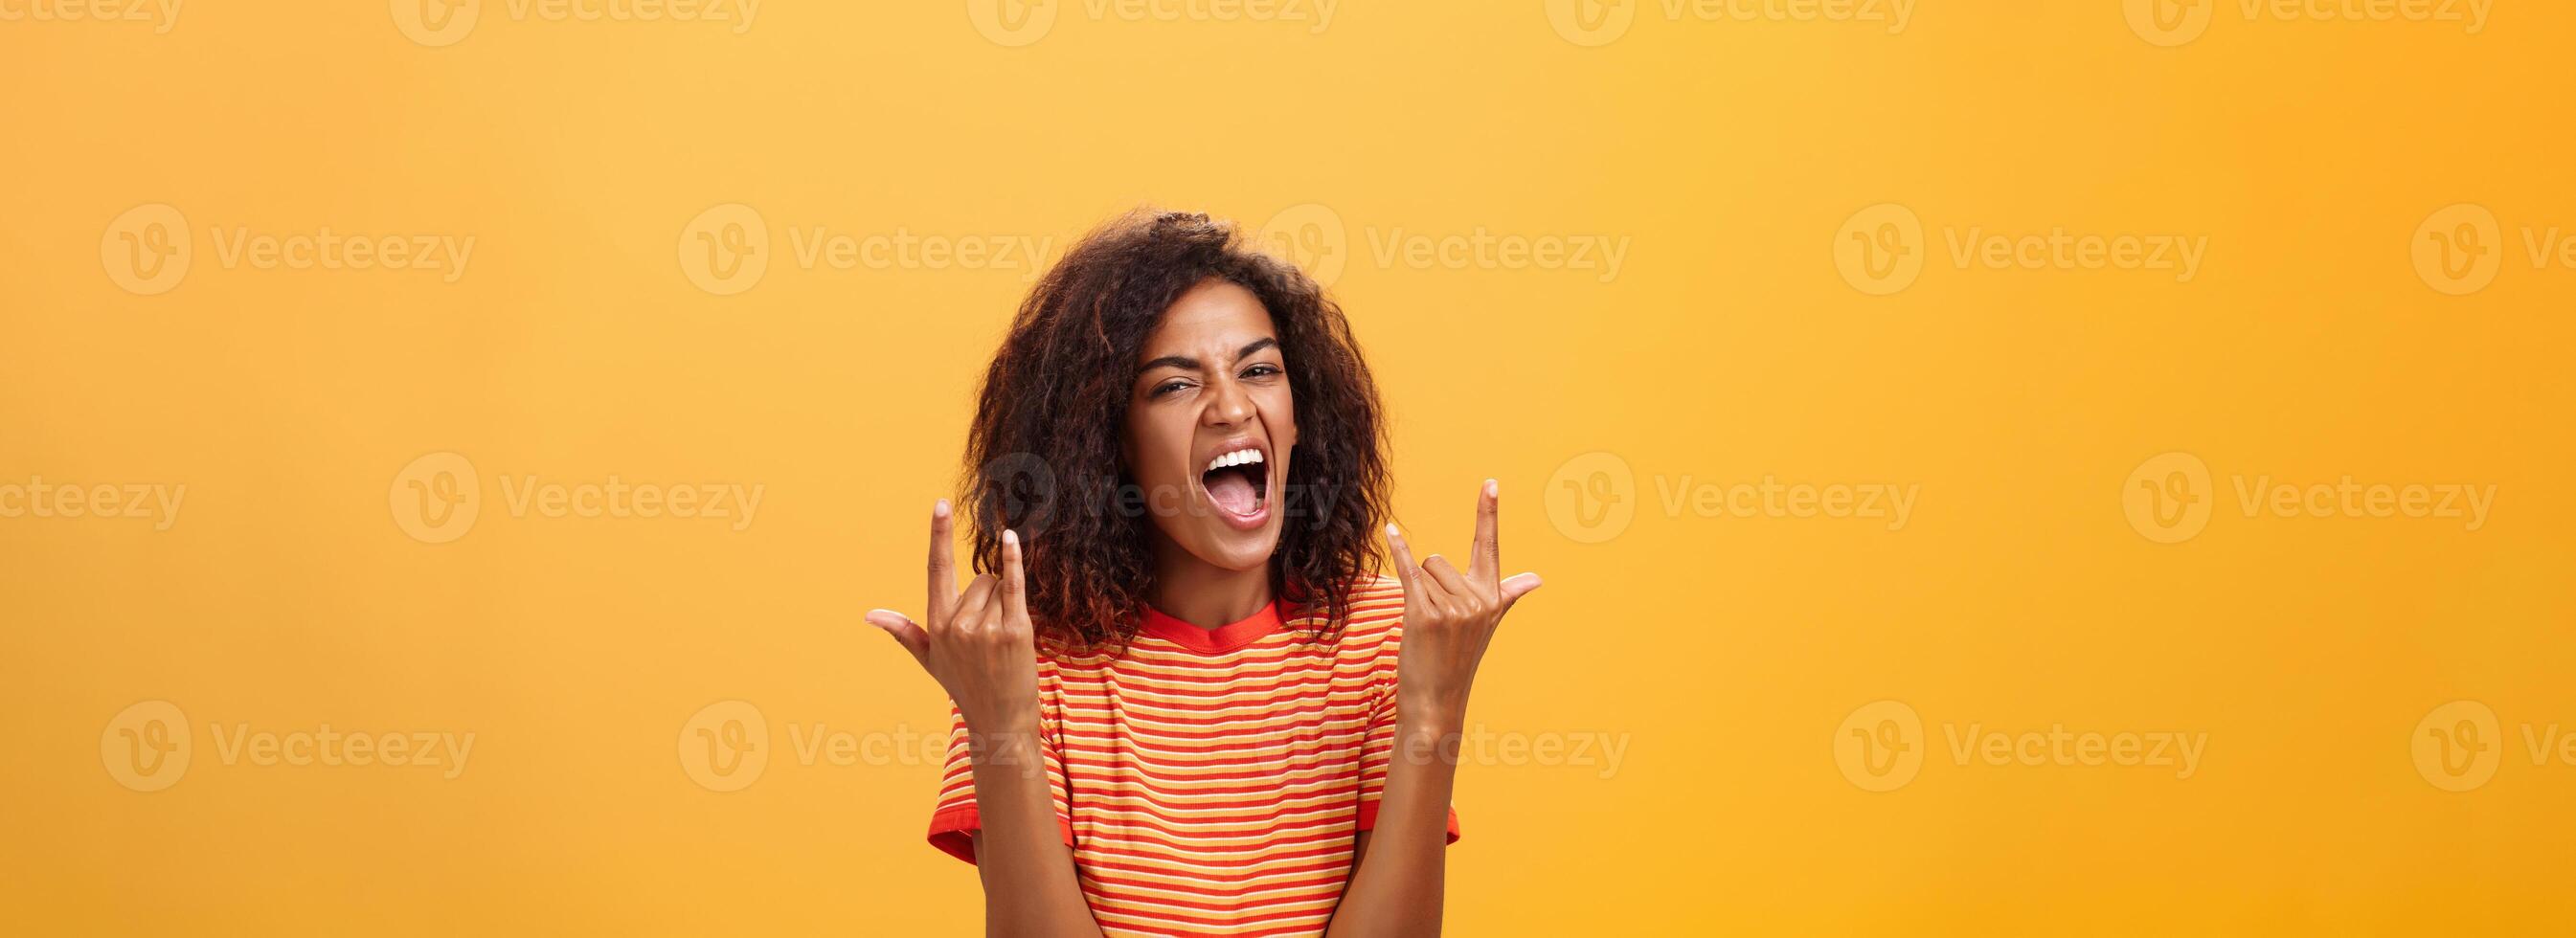 Waist-up shot of amazed happy stylish african american woman feeling awesome rocking on party yelling from joy and satisfaction showing rock n roll gesture posing over orange background photo